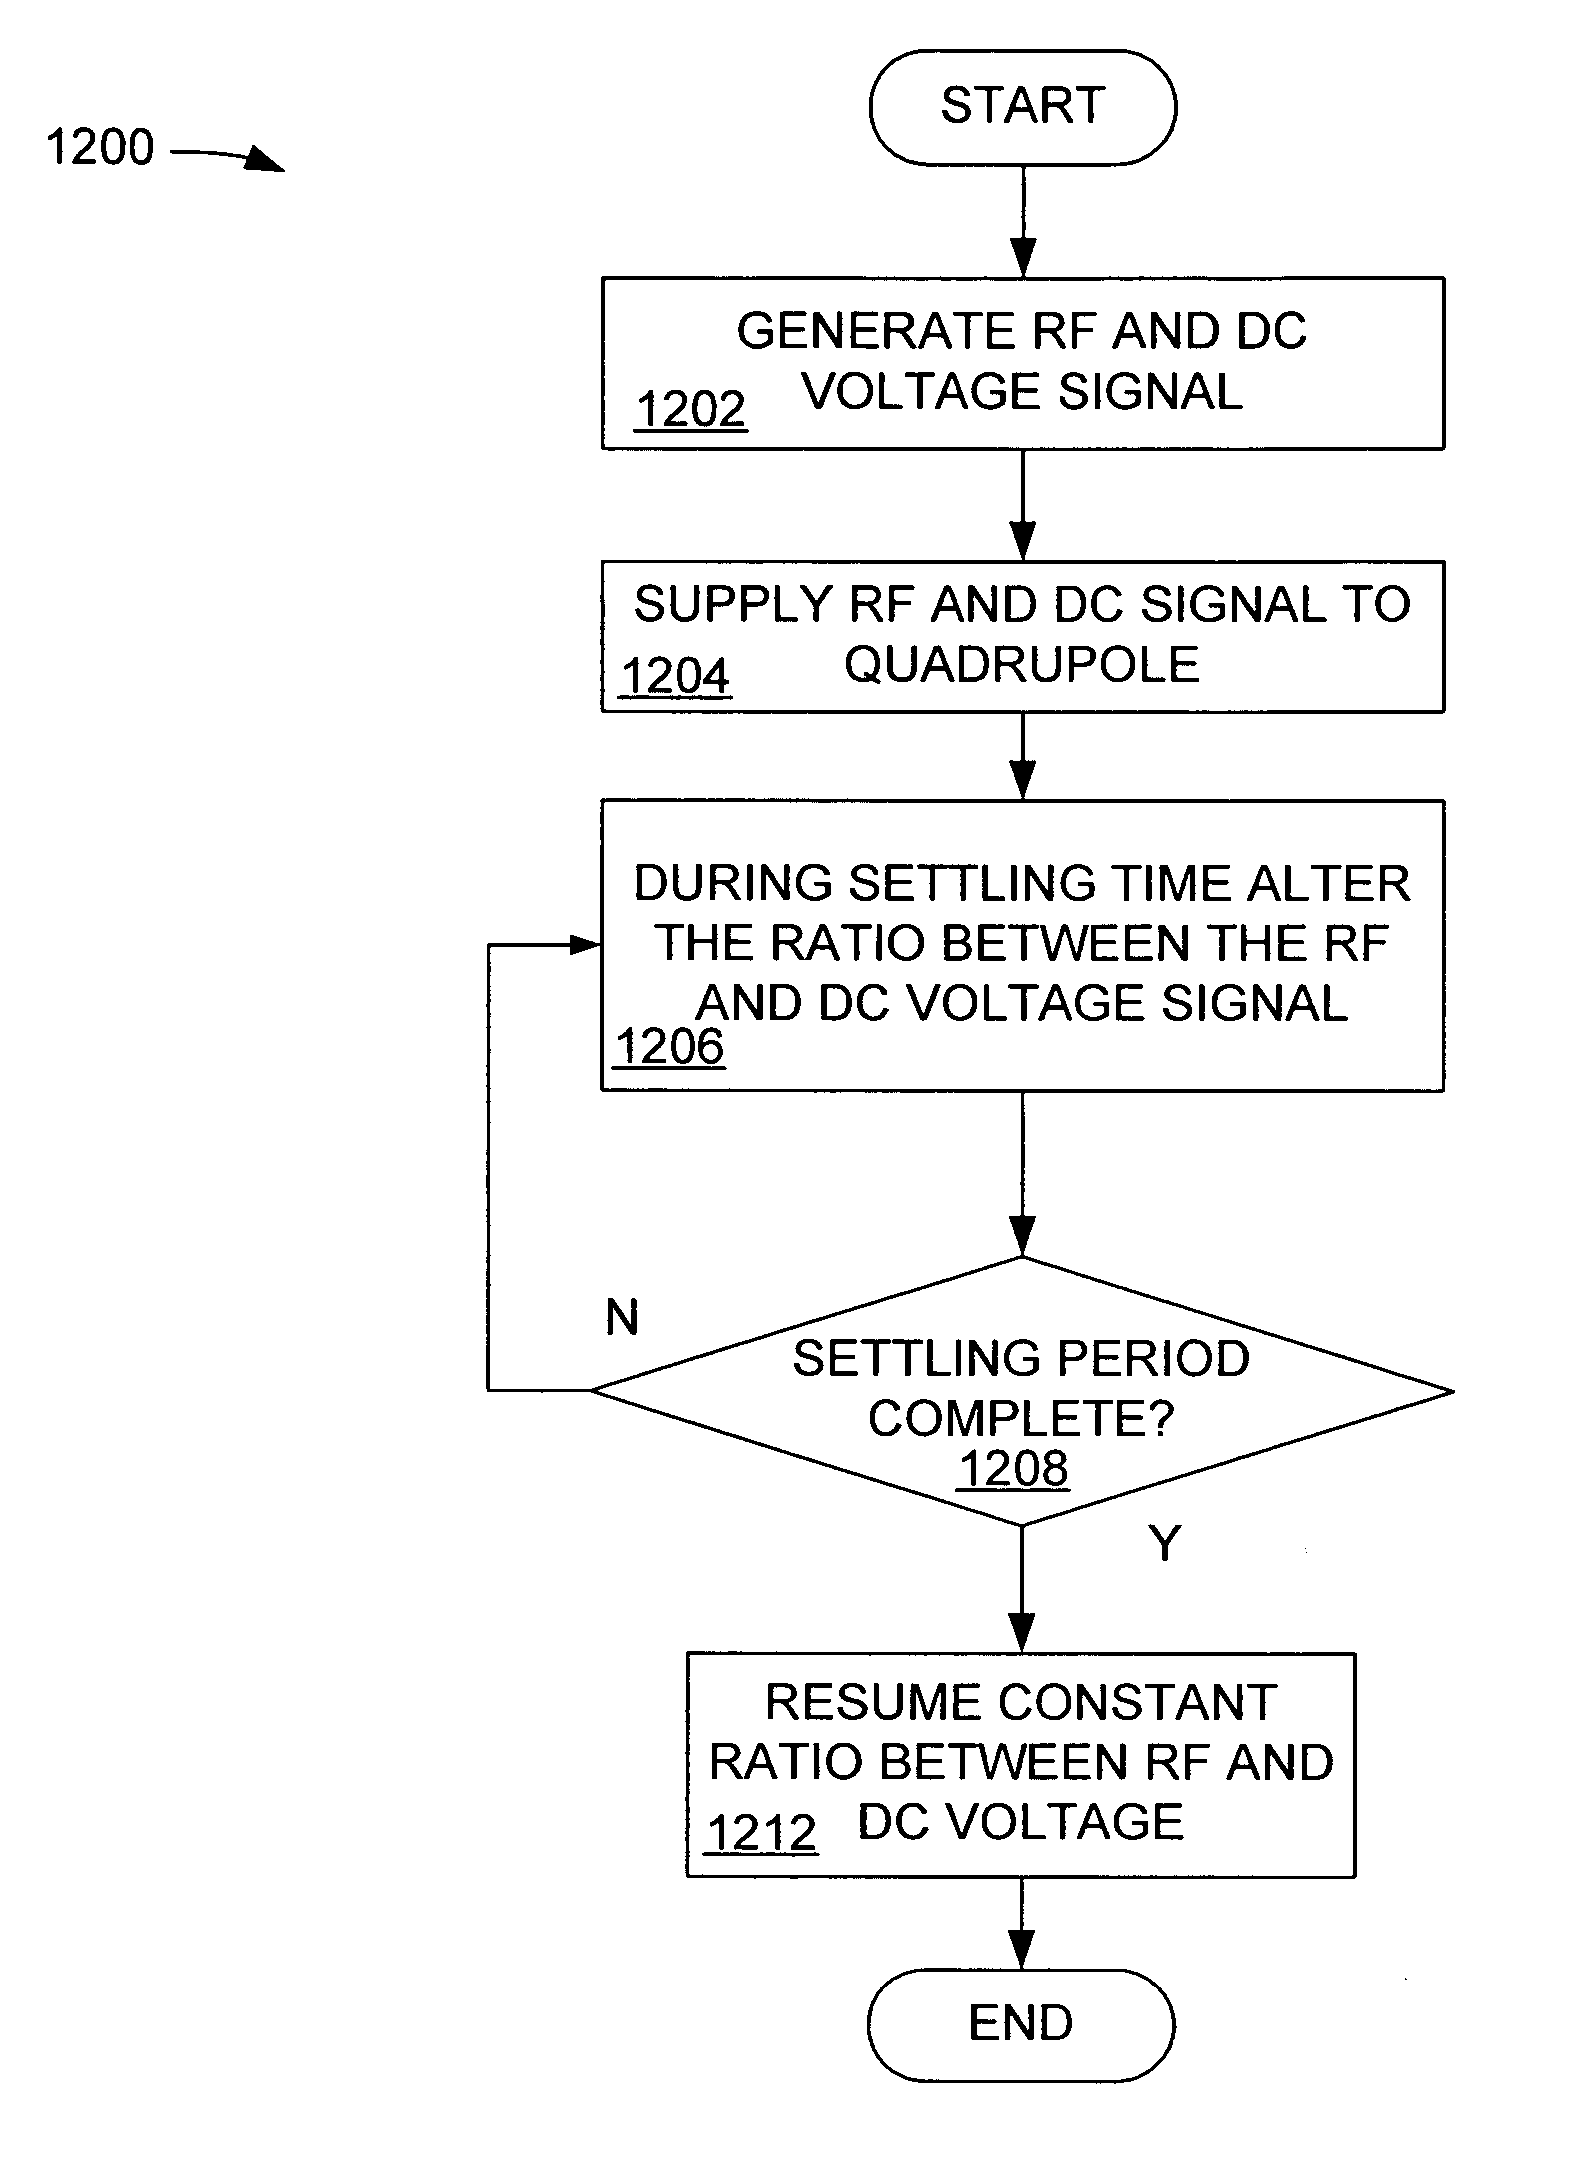 Apparatus and method for electronically driving a quadrupole mass spectrometer to improve signal performance at fast scan rates